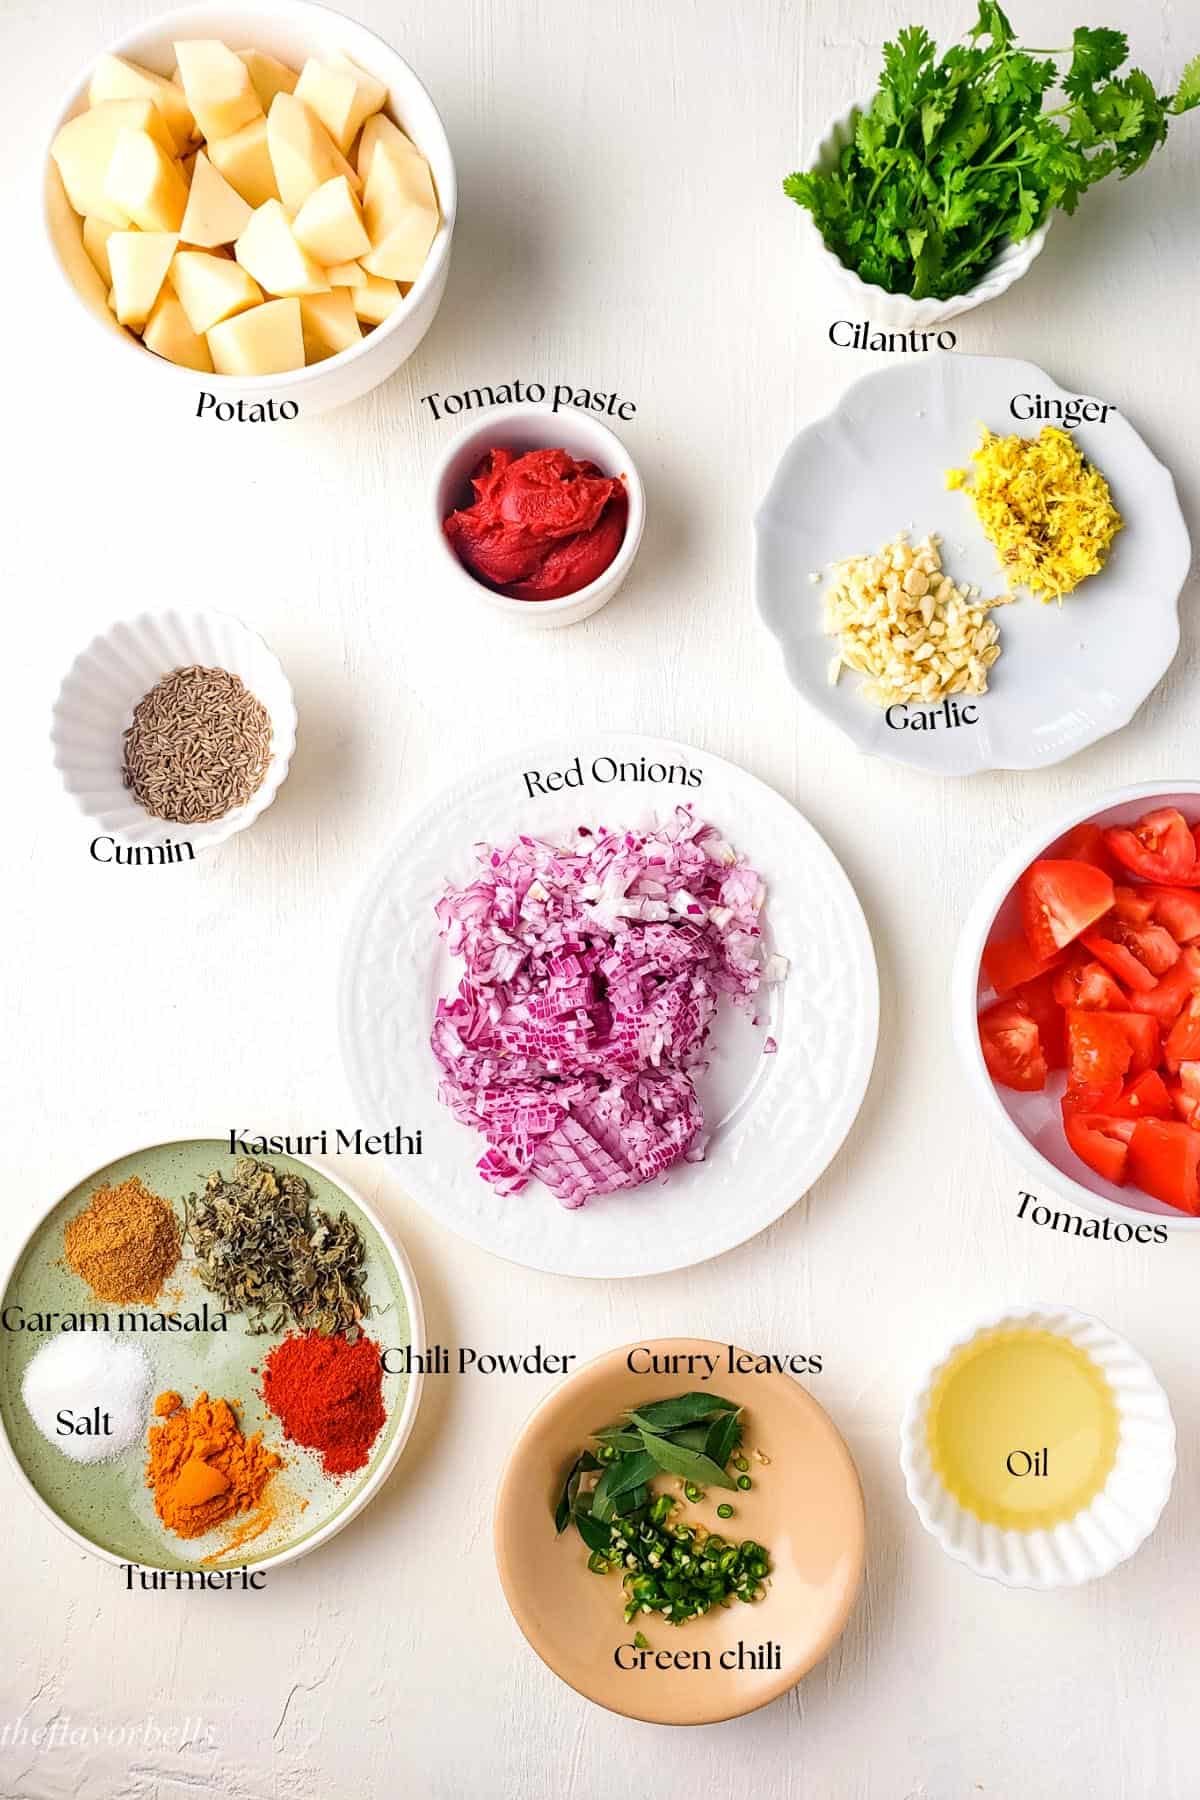 image showing all the ingredients required to make all ki sabzi